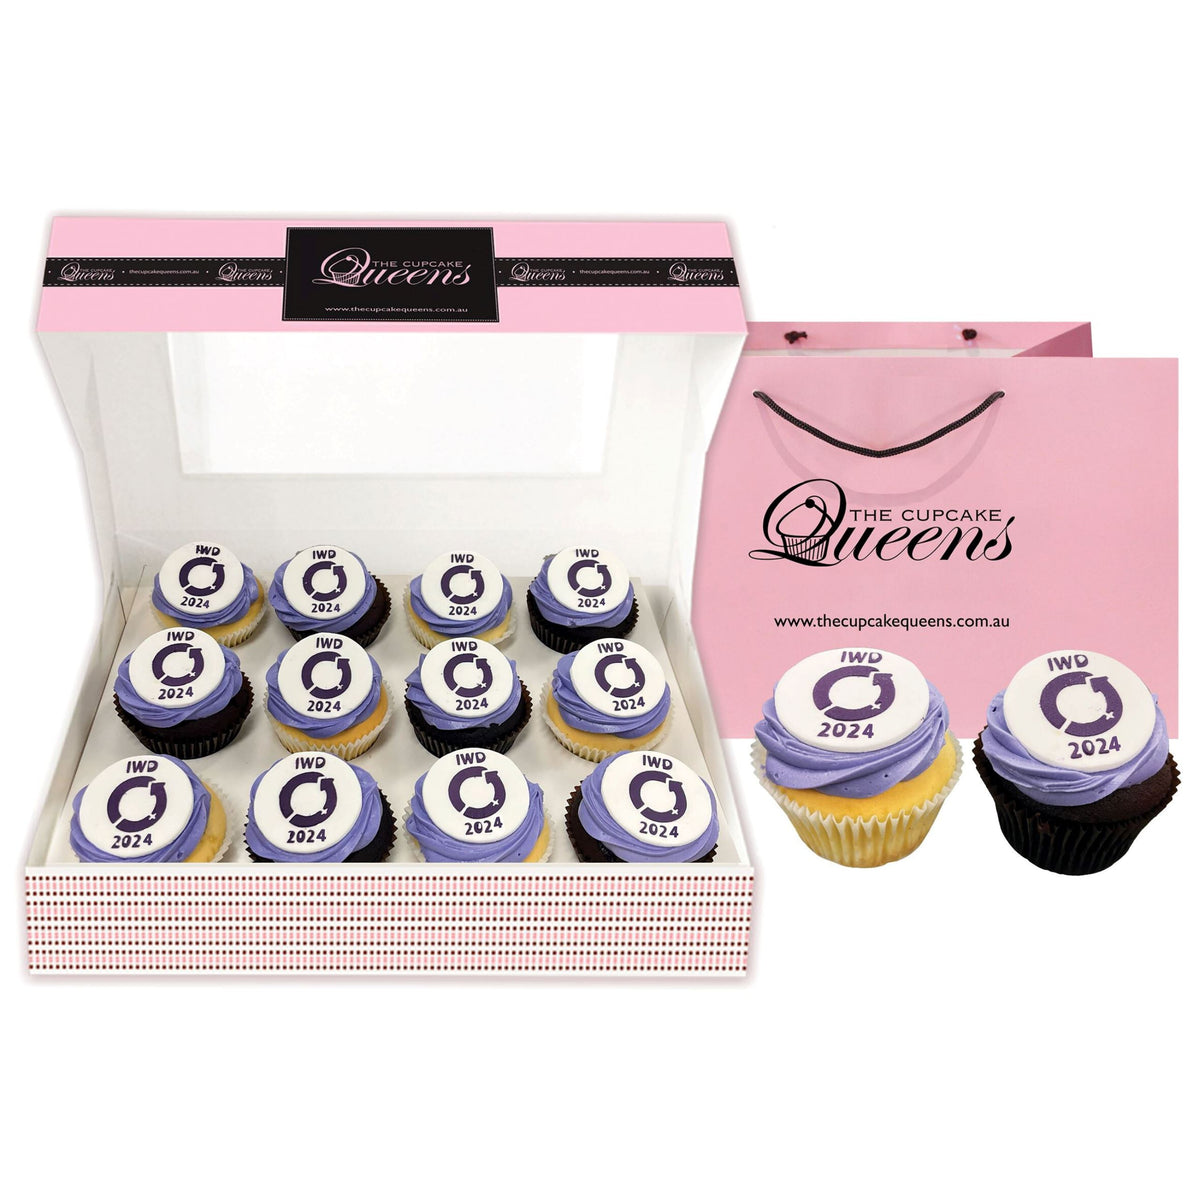 IWD 2024 Regular size Cupcake Giftbox Cupcakes Pre Selected Boxes The Cupcake Queens 